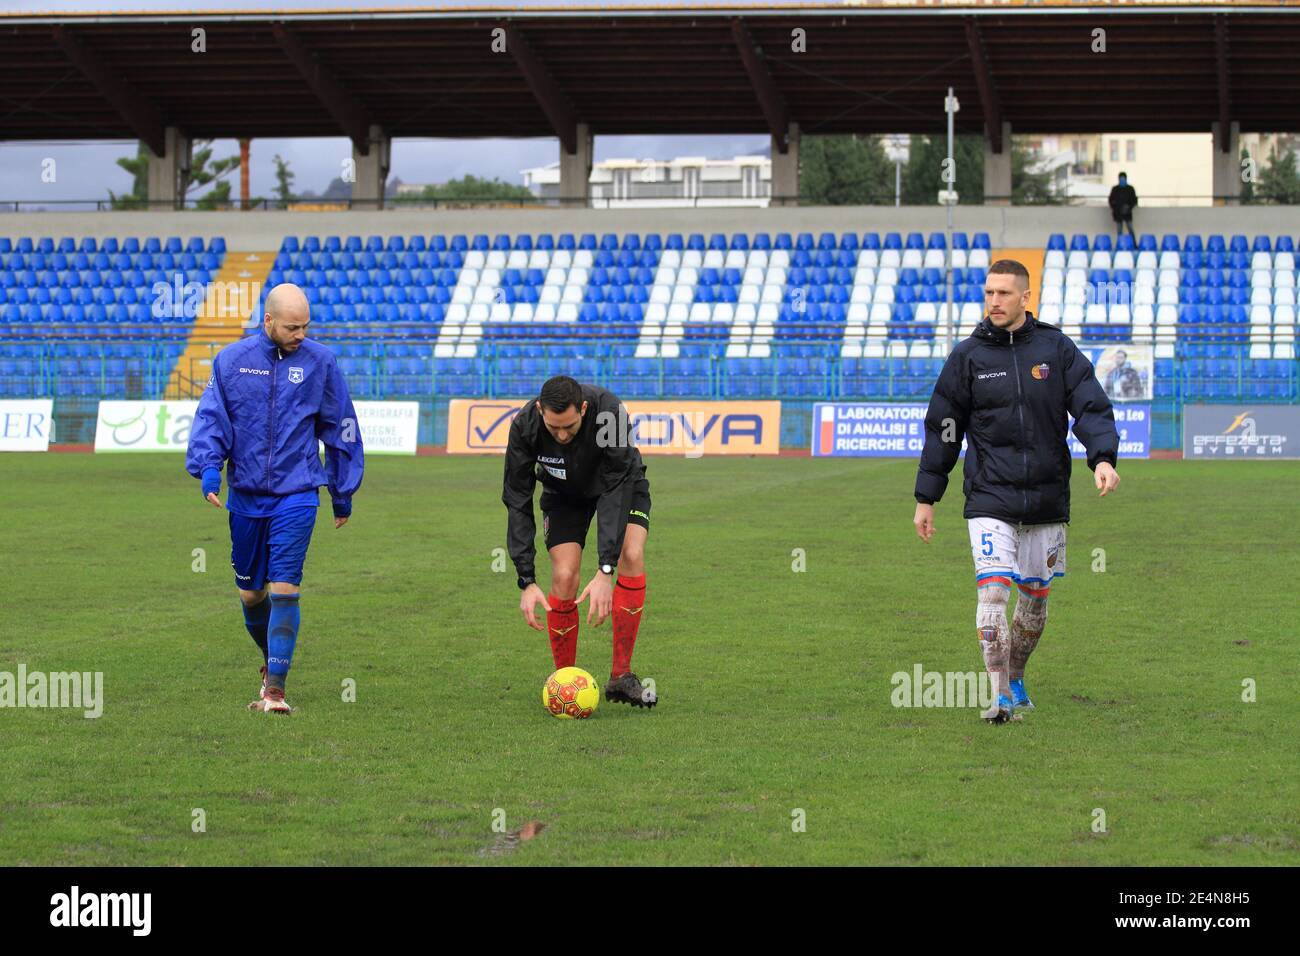 Pagani, Italy. 24th Jan, 2021. Serie C Italian Championship, Girone C Pro League football match between Paganese and Catania, 20th day of the championship. At the third inspection, the referee Andrea Colombo of Como has taken the decision to postpone the match of Pagani to a date to be set, considering impracticable conditions of the playing field, hit by an abundant rain in the last hours. (Photo by Pasquale Senatore/Pacific Press/Sipa USA) Credit: Sipa USA/Alamy Live News Stock Photo